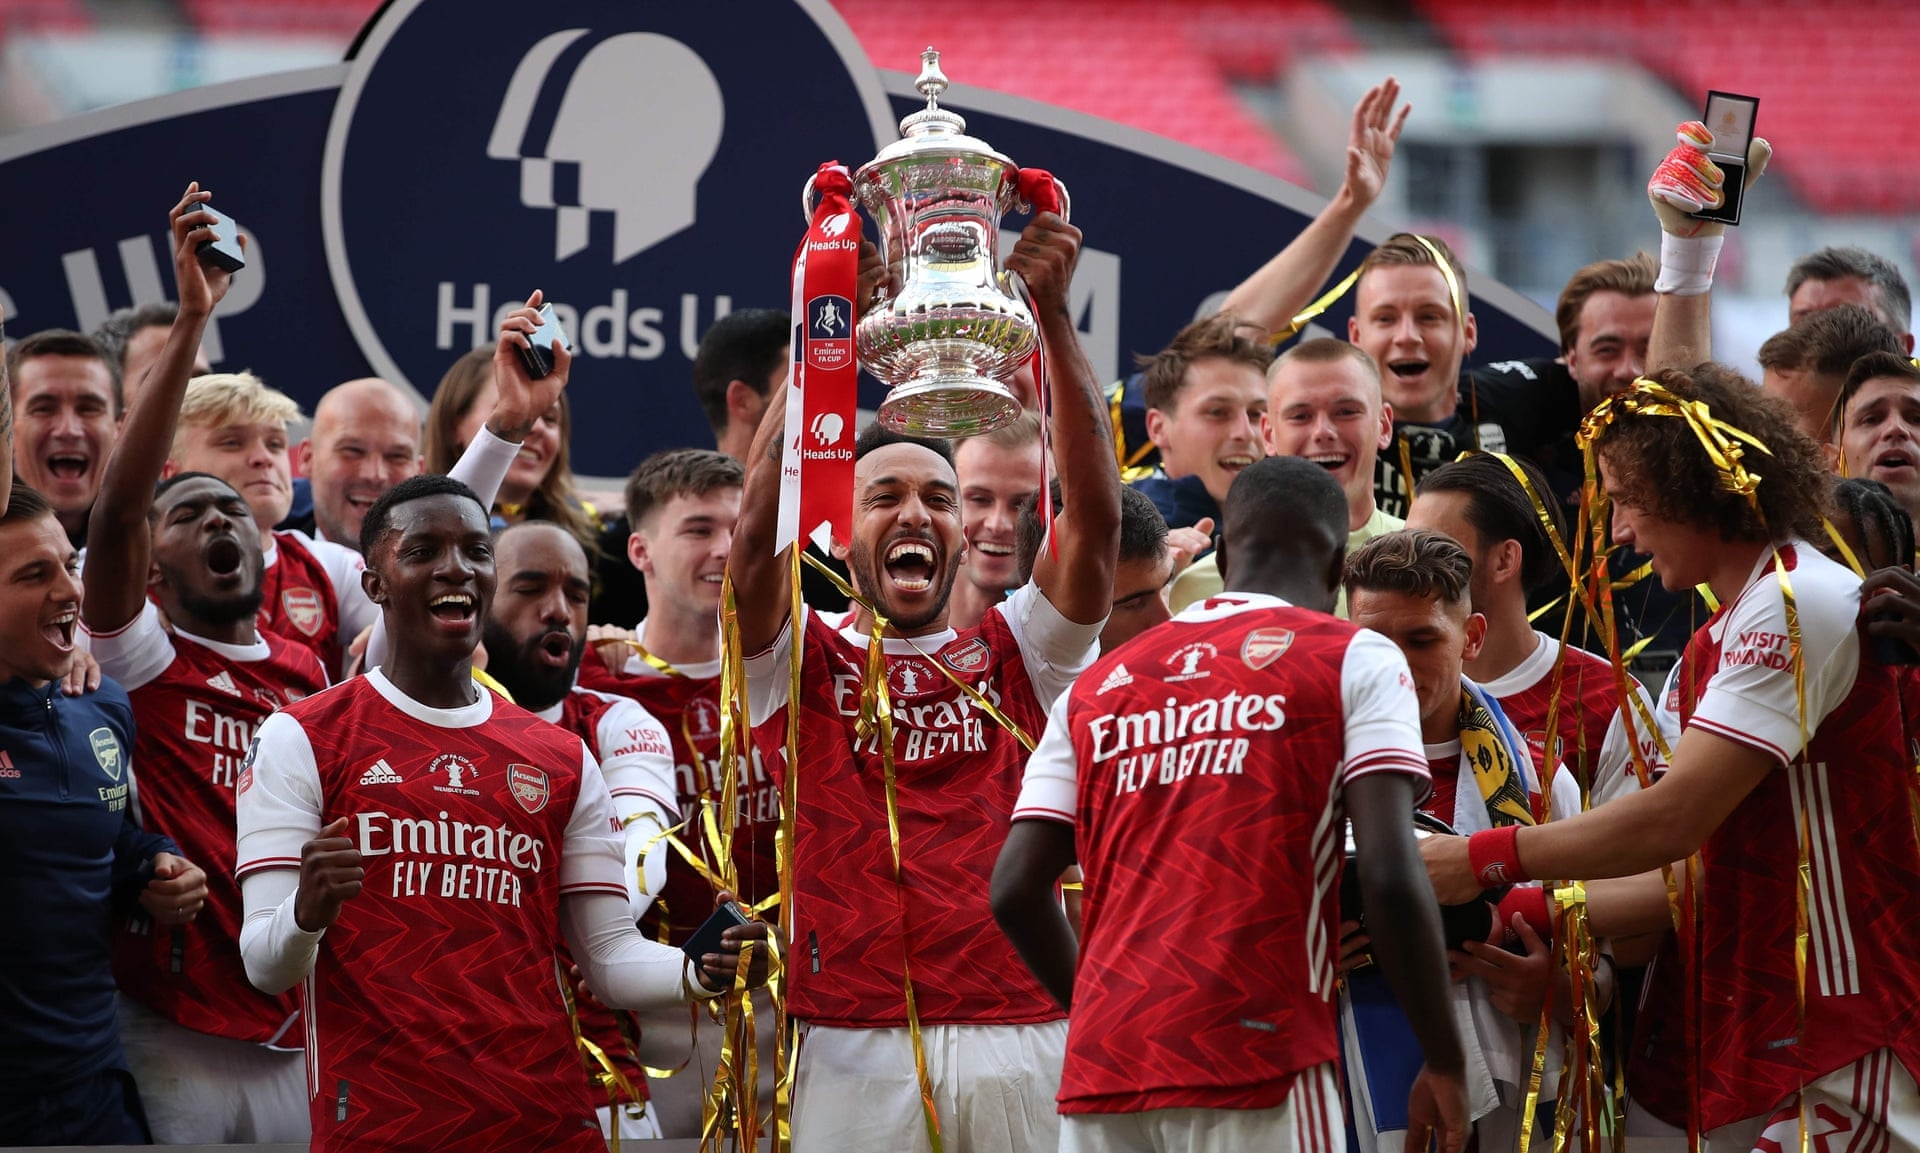 Arsenal came from behind to beat Chelsea and win FA Cup